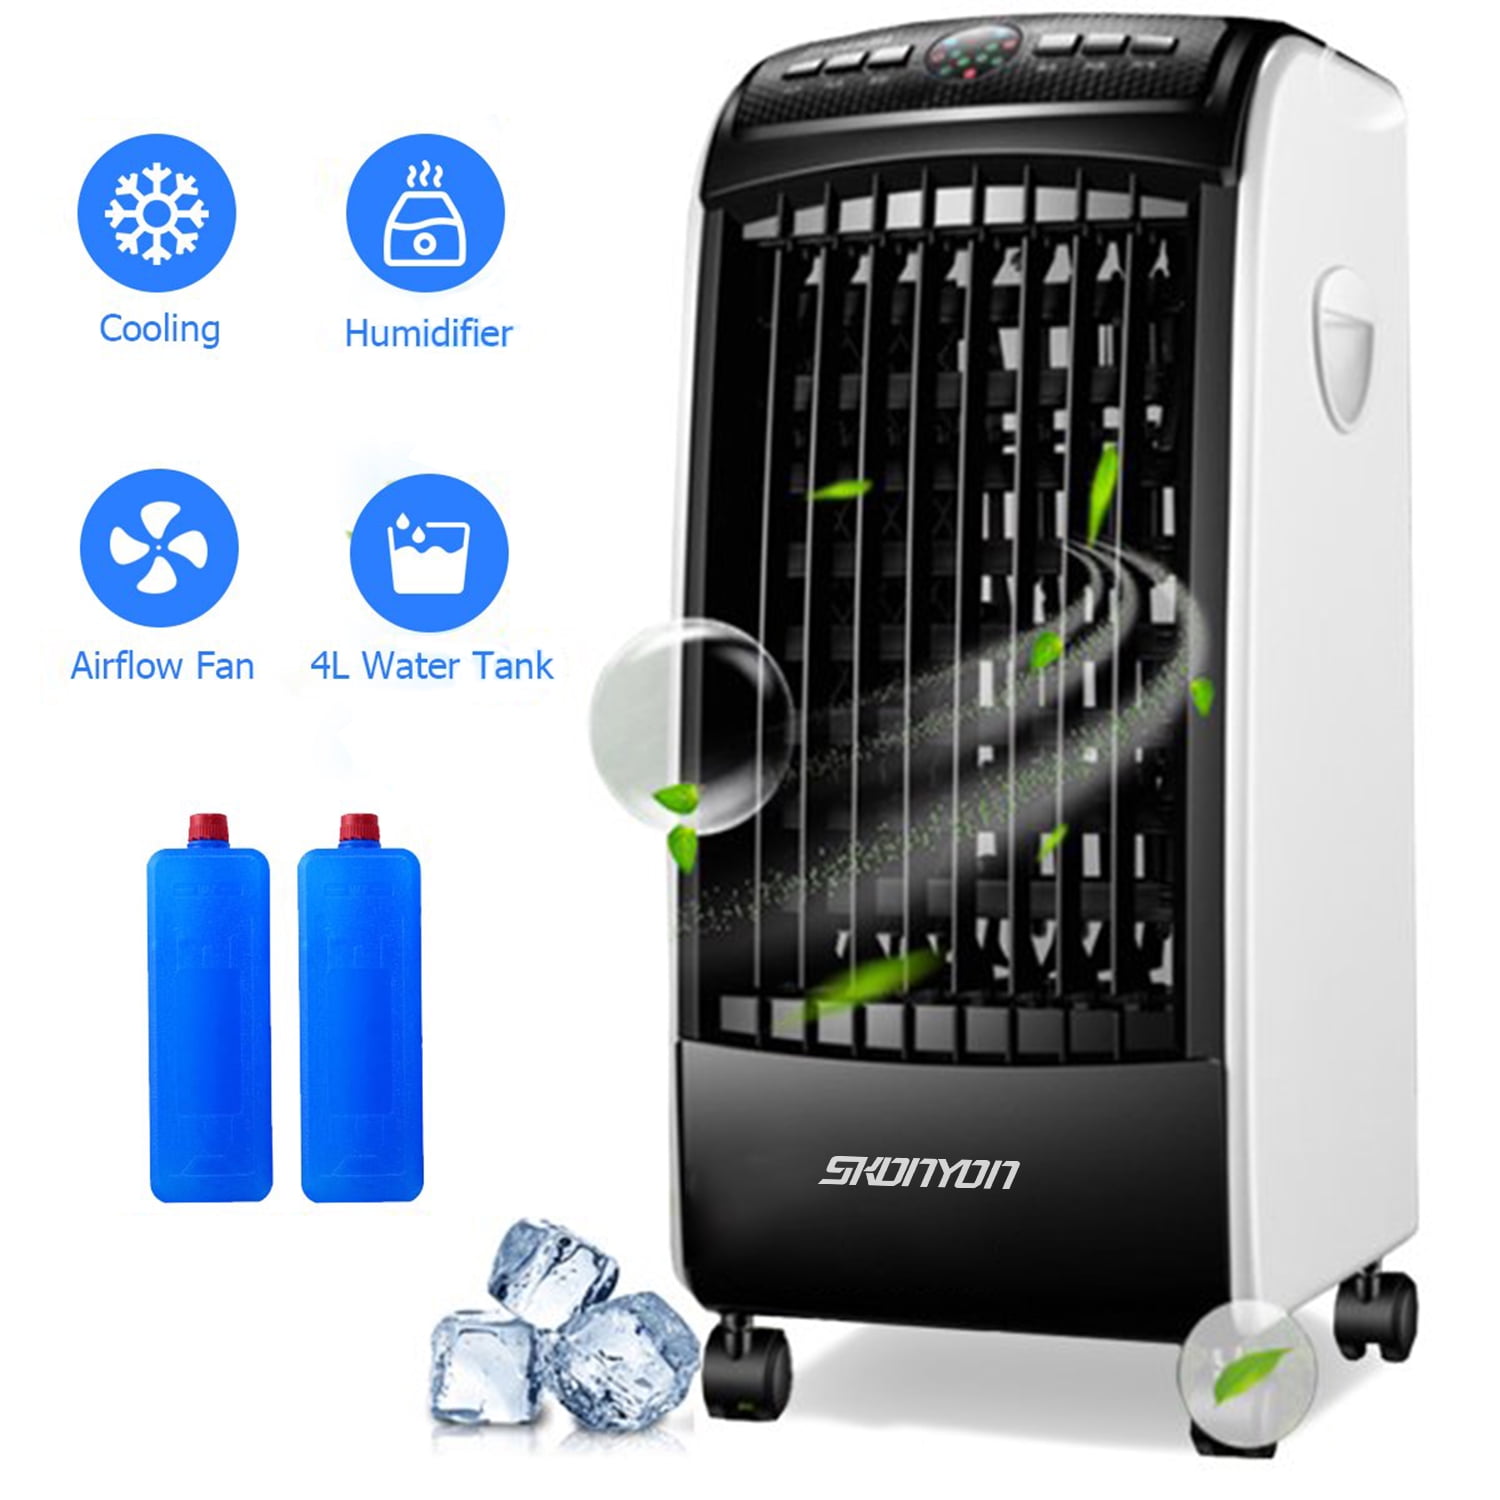 Ultra 3 Speed Settings Compact Portable Evaporative Air Cooler As Seen On TV